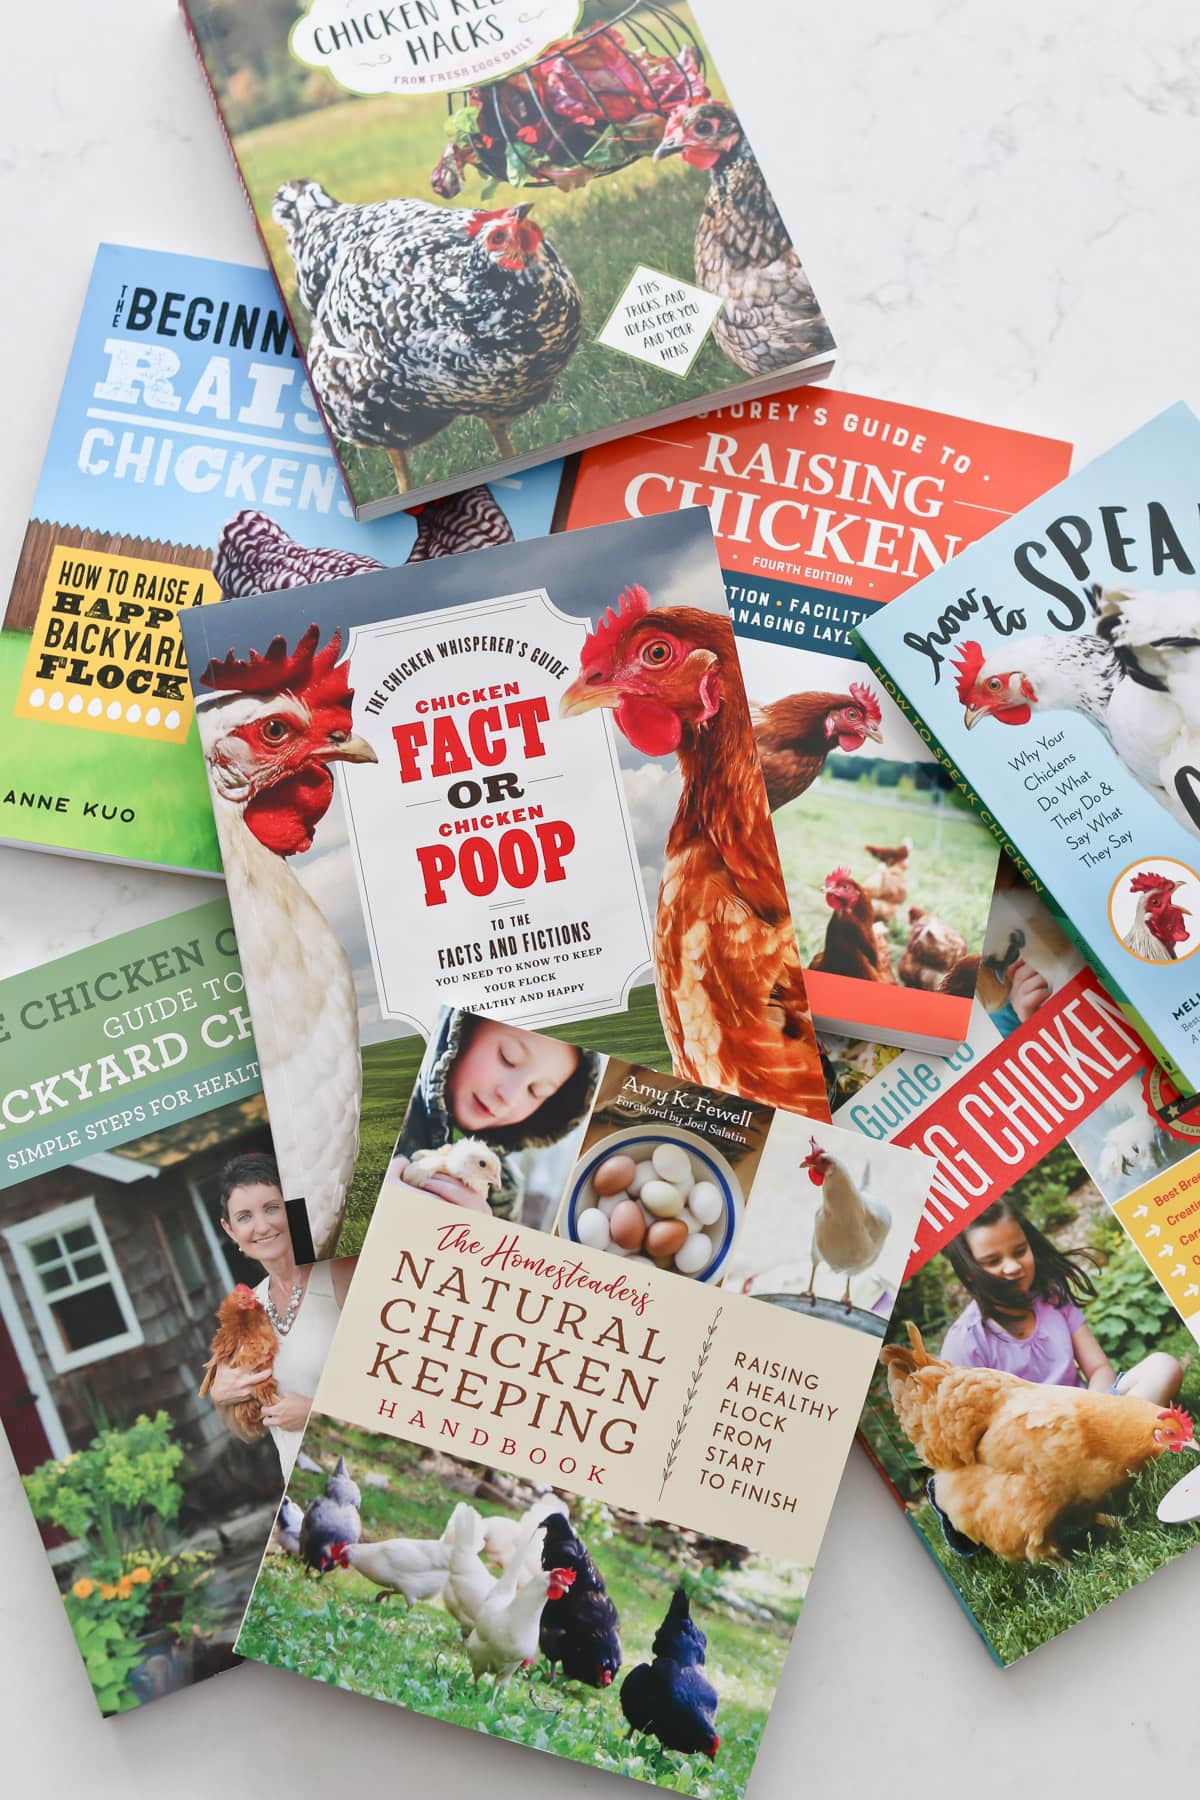 The Best 8 Books on Raising Chickens